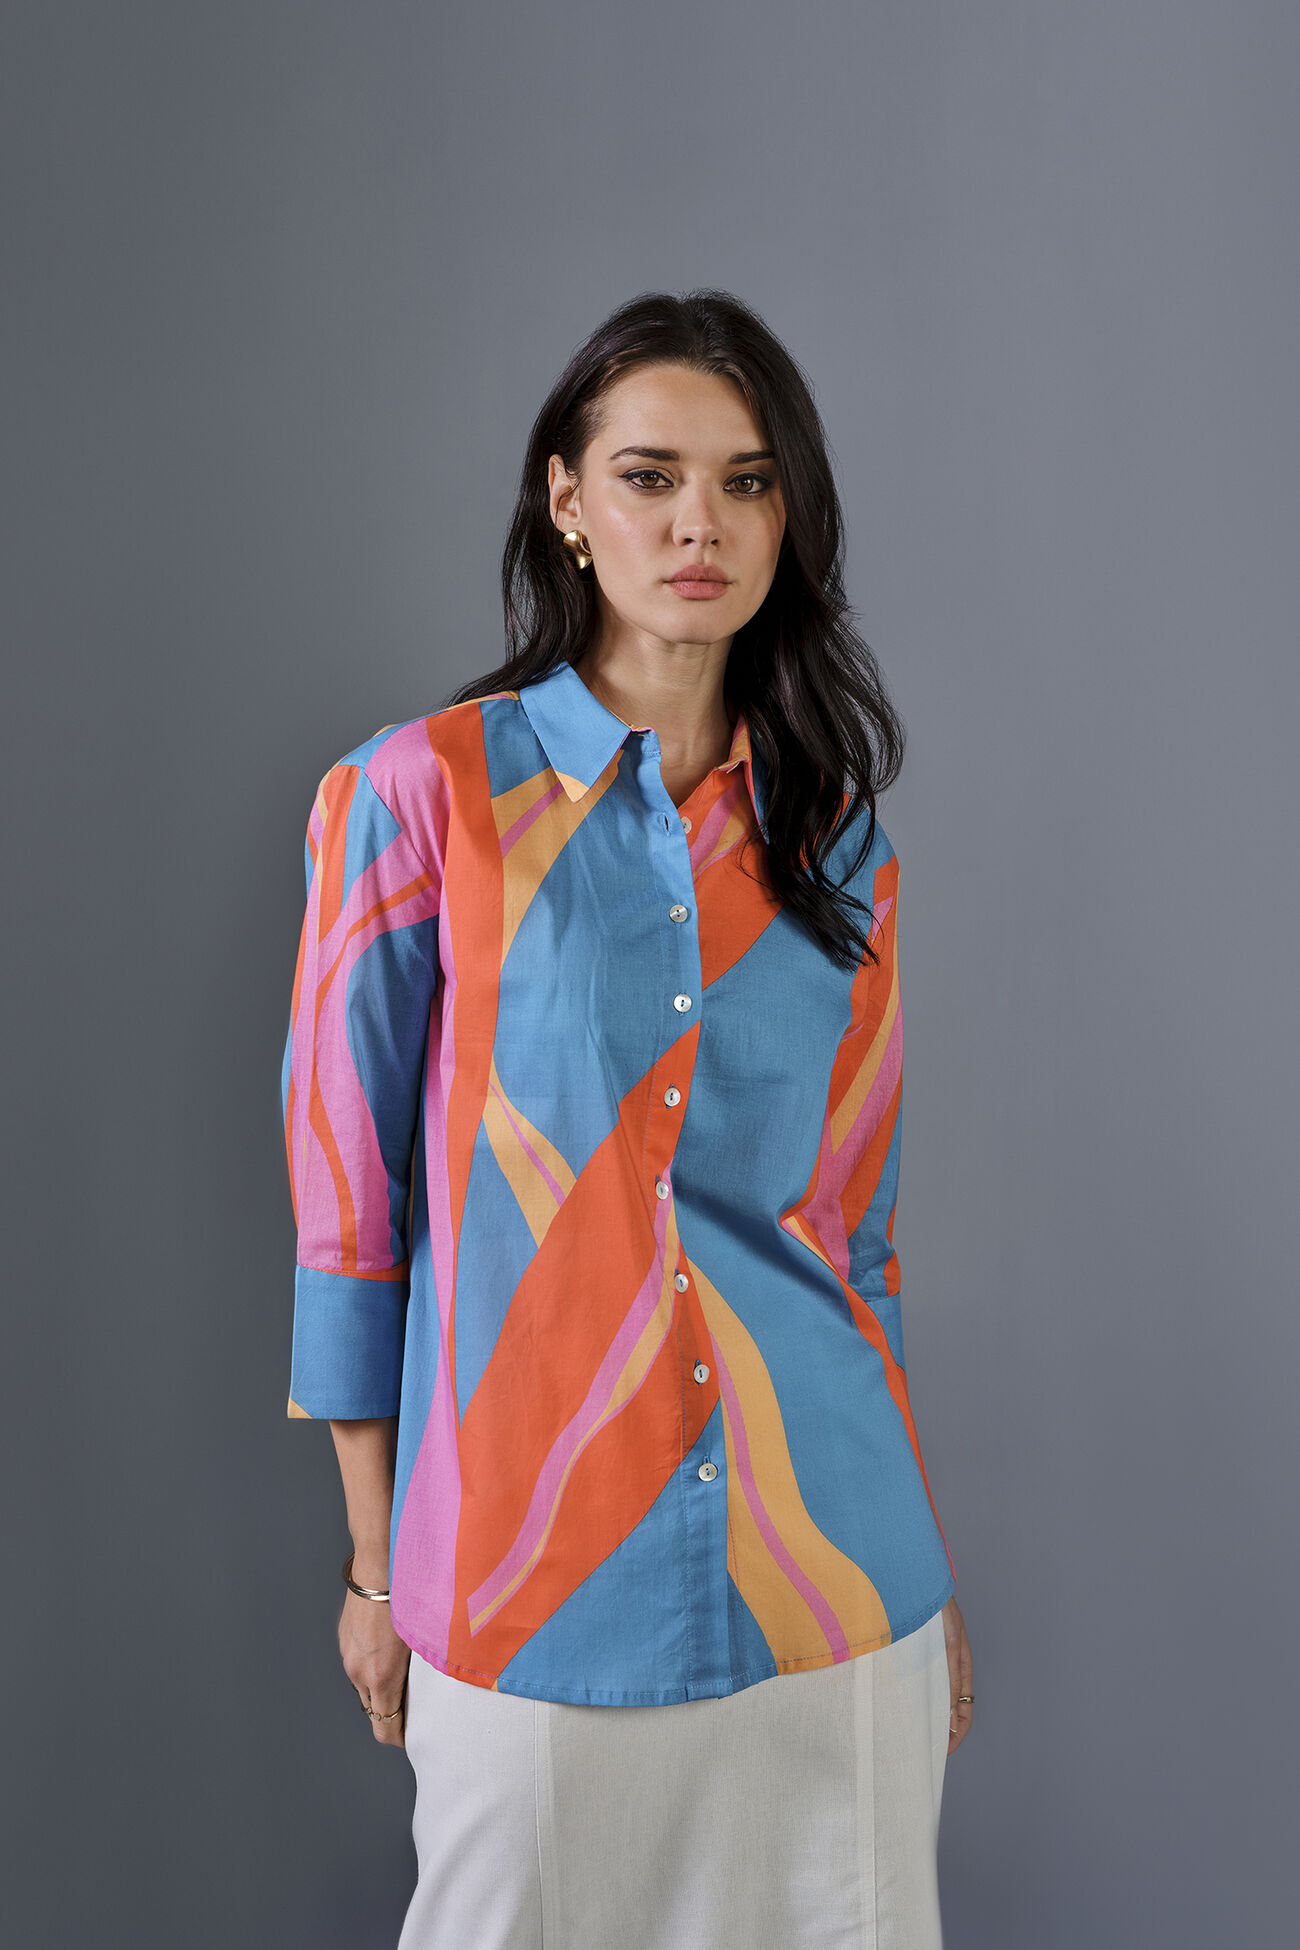 Abstract Swirls Cotton Shirt, Multi Color, image 3